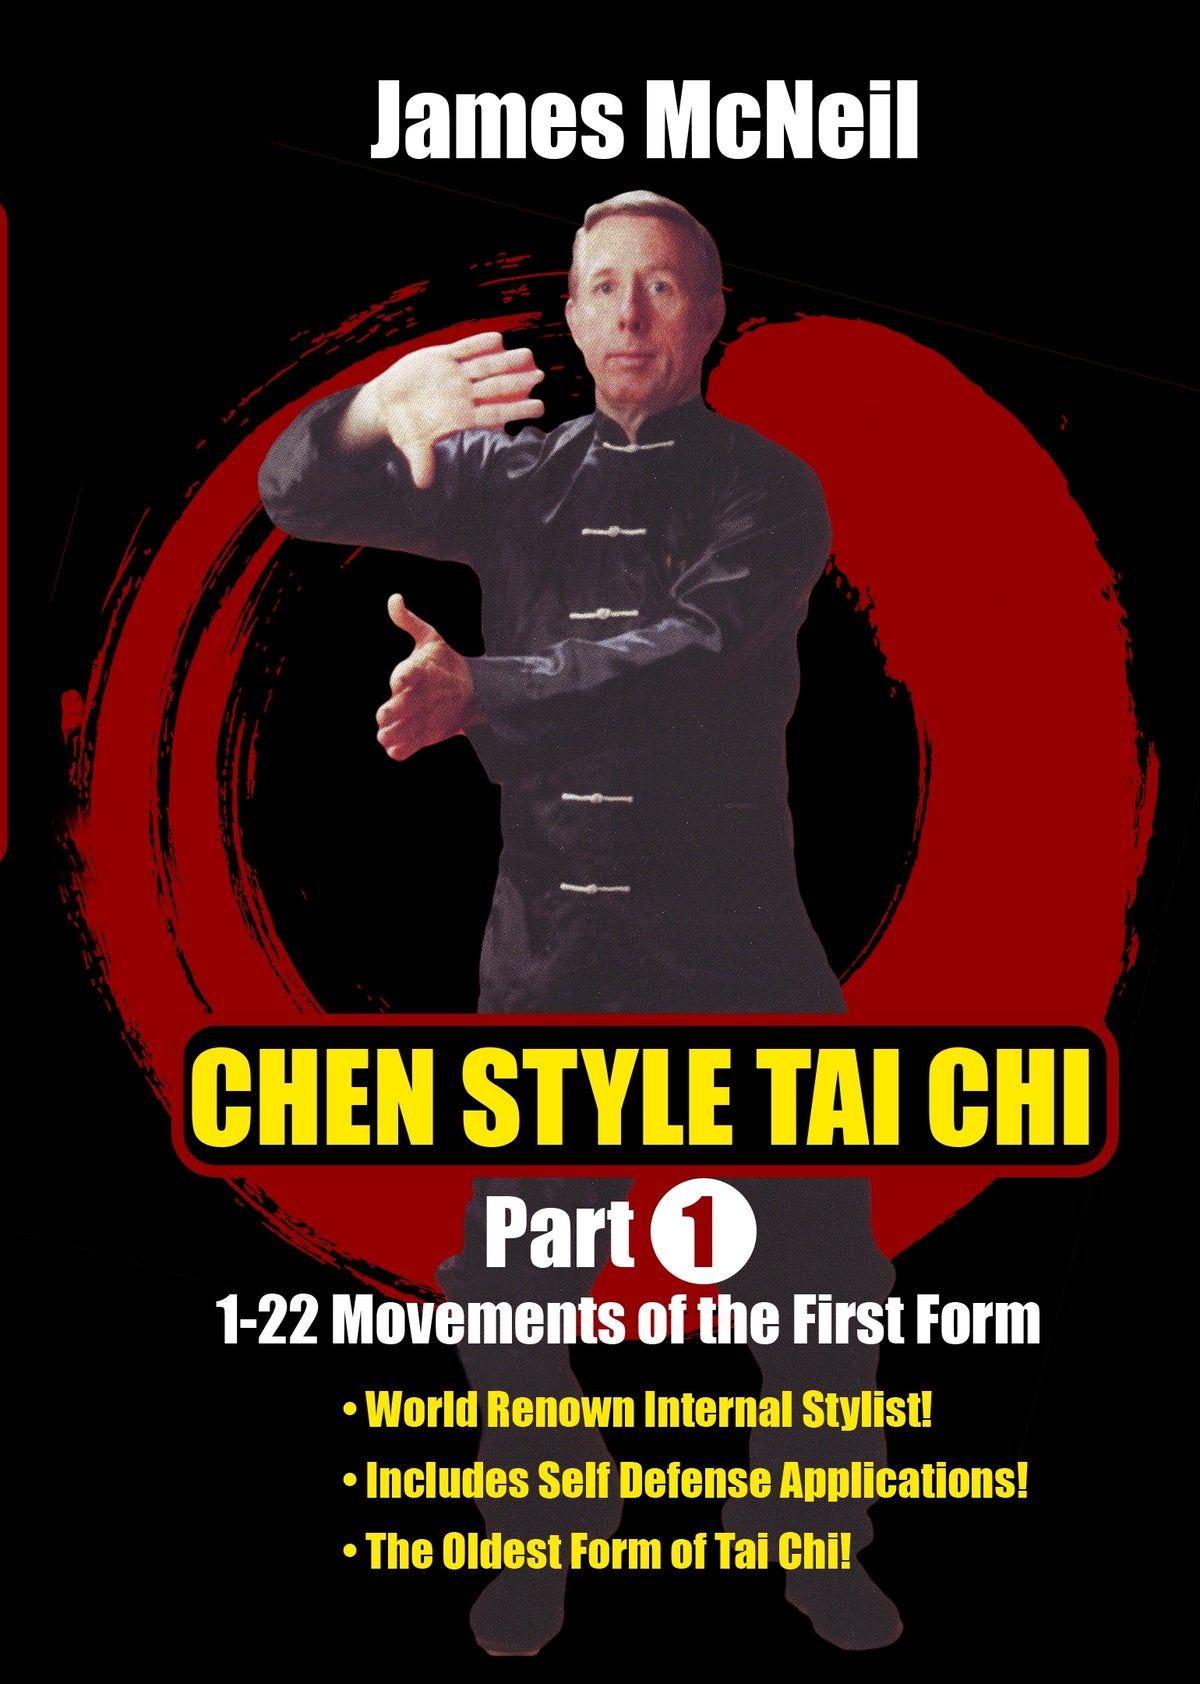 Chen Style Tai Chi Chuan Form 1-22 movements #1 DVD James McNeil kung fu